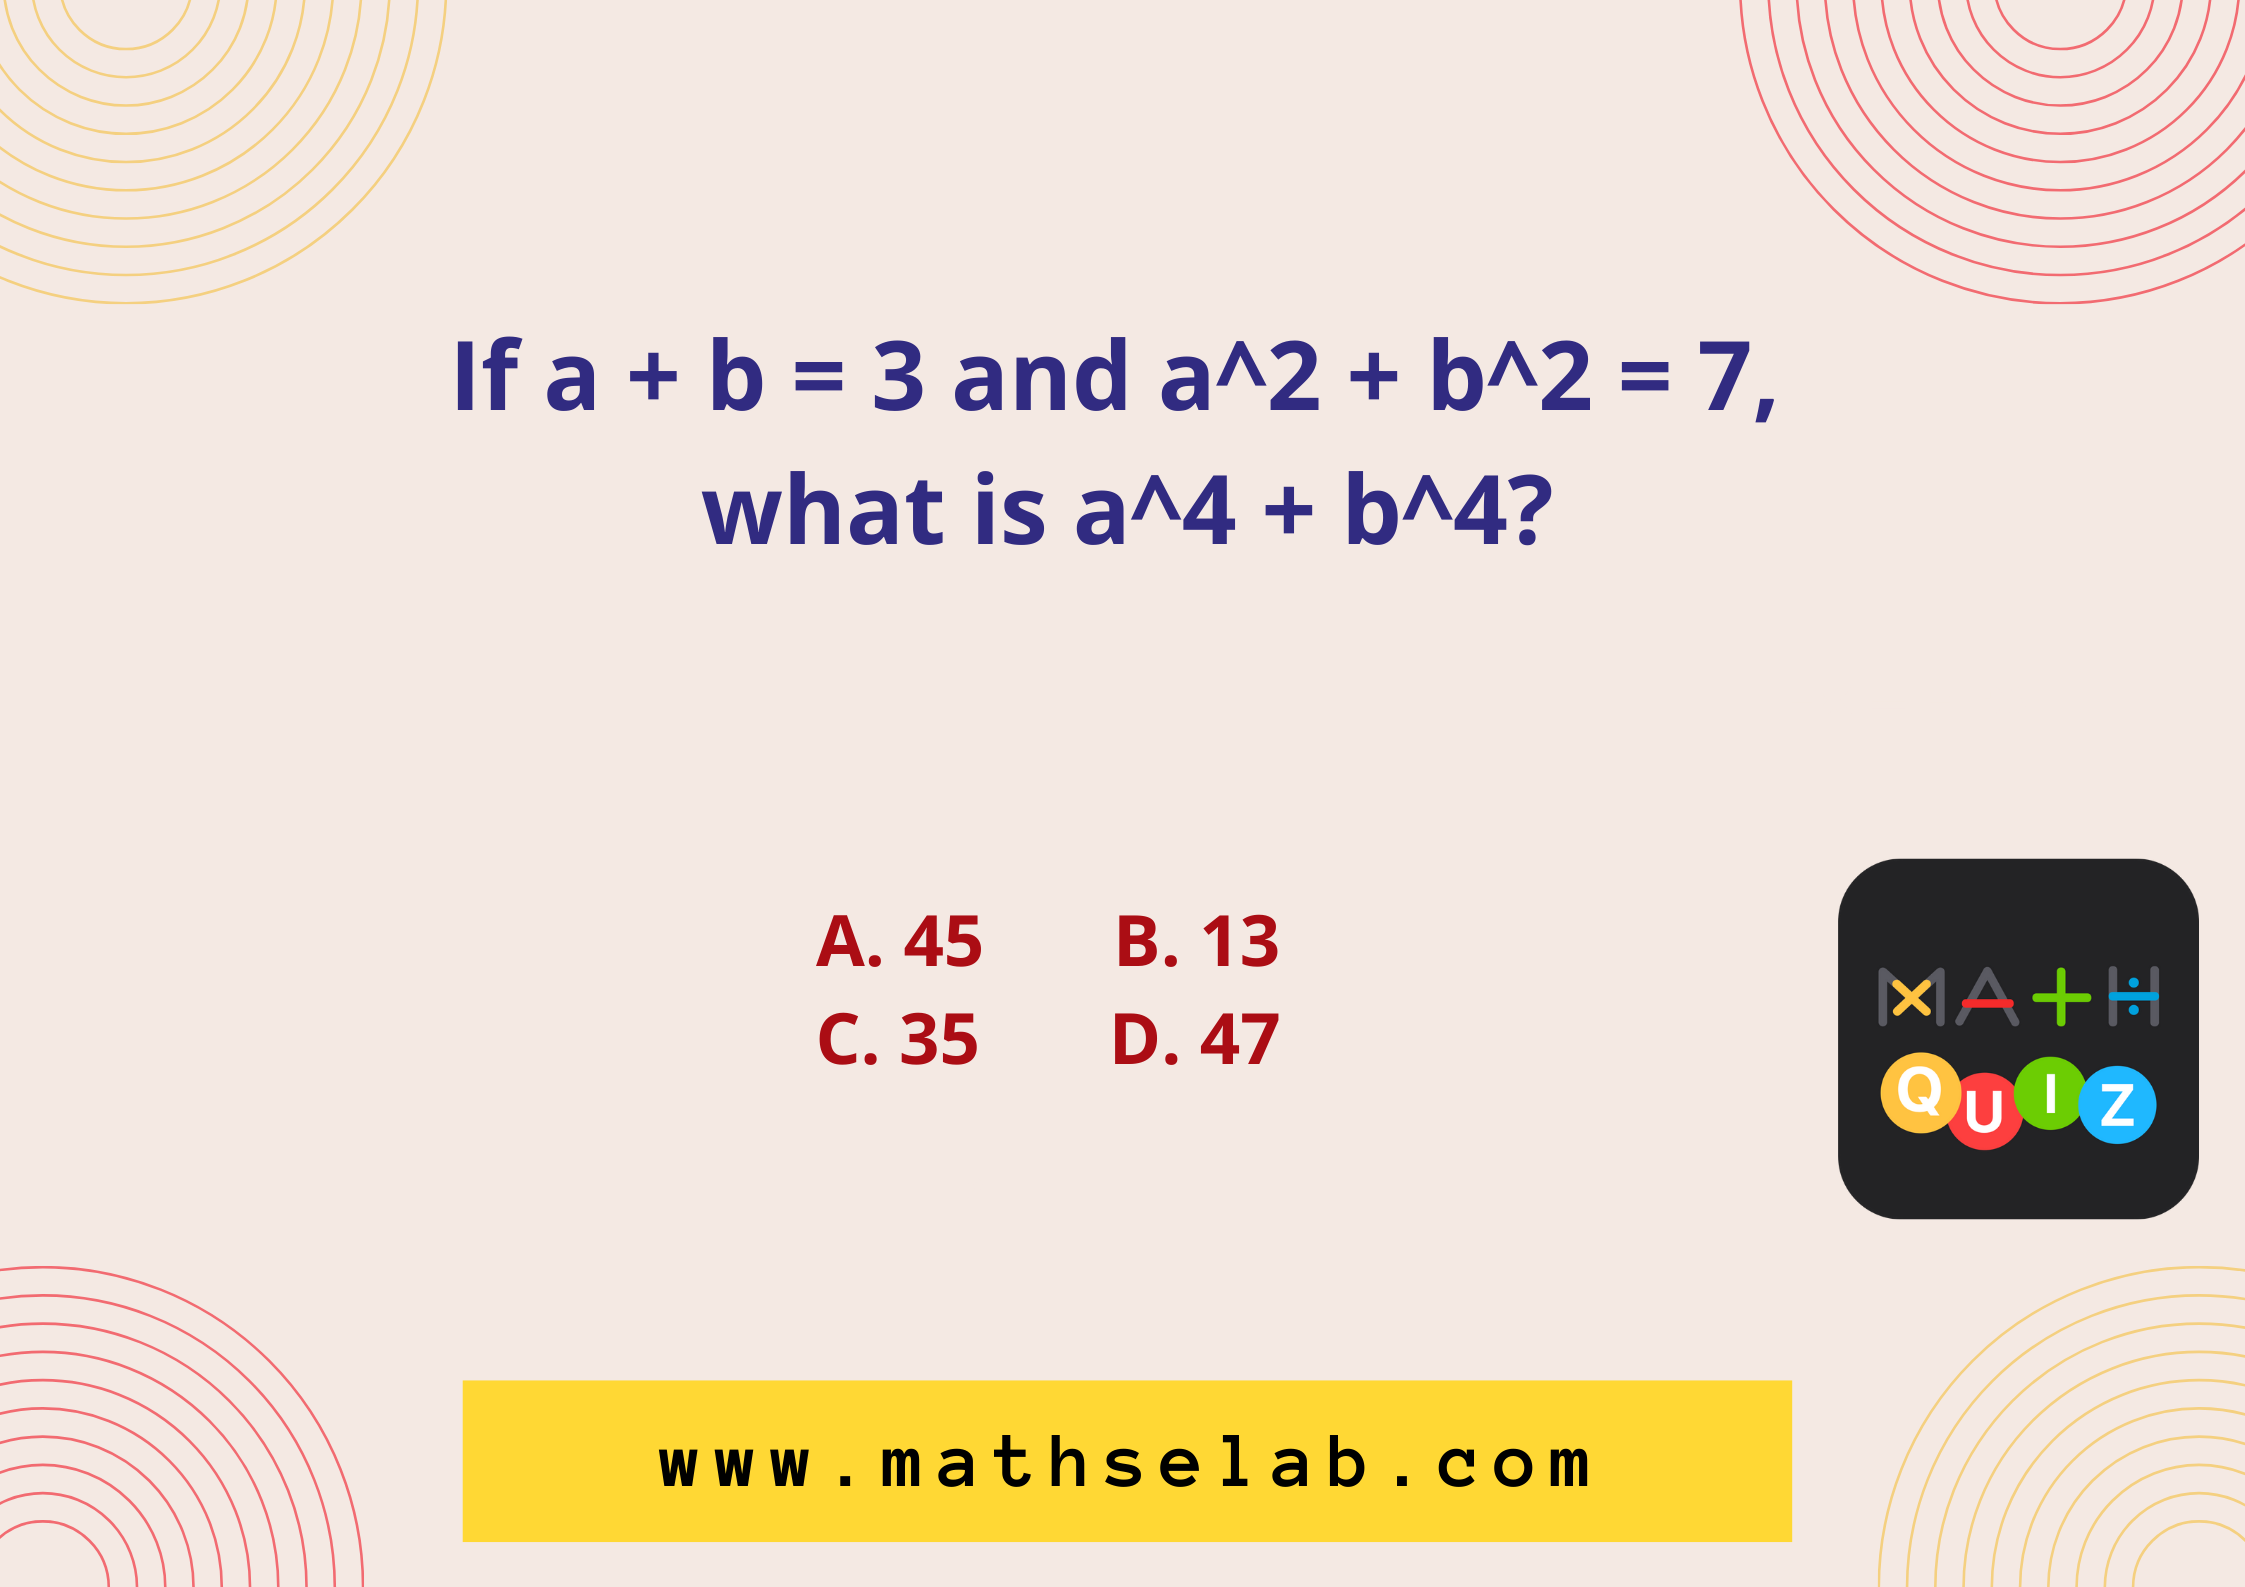 If a + b = 3 and a^2 + b^2 = 7, what is a^4 + b^4?